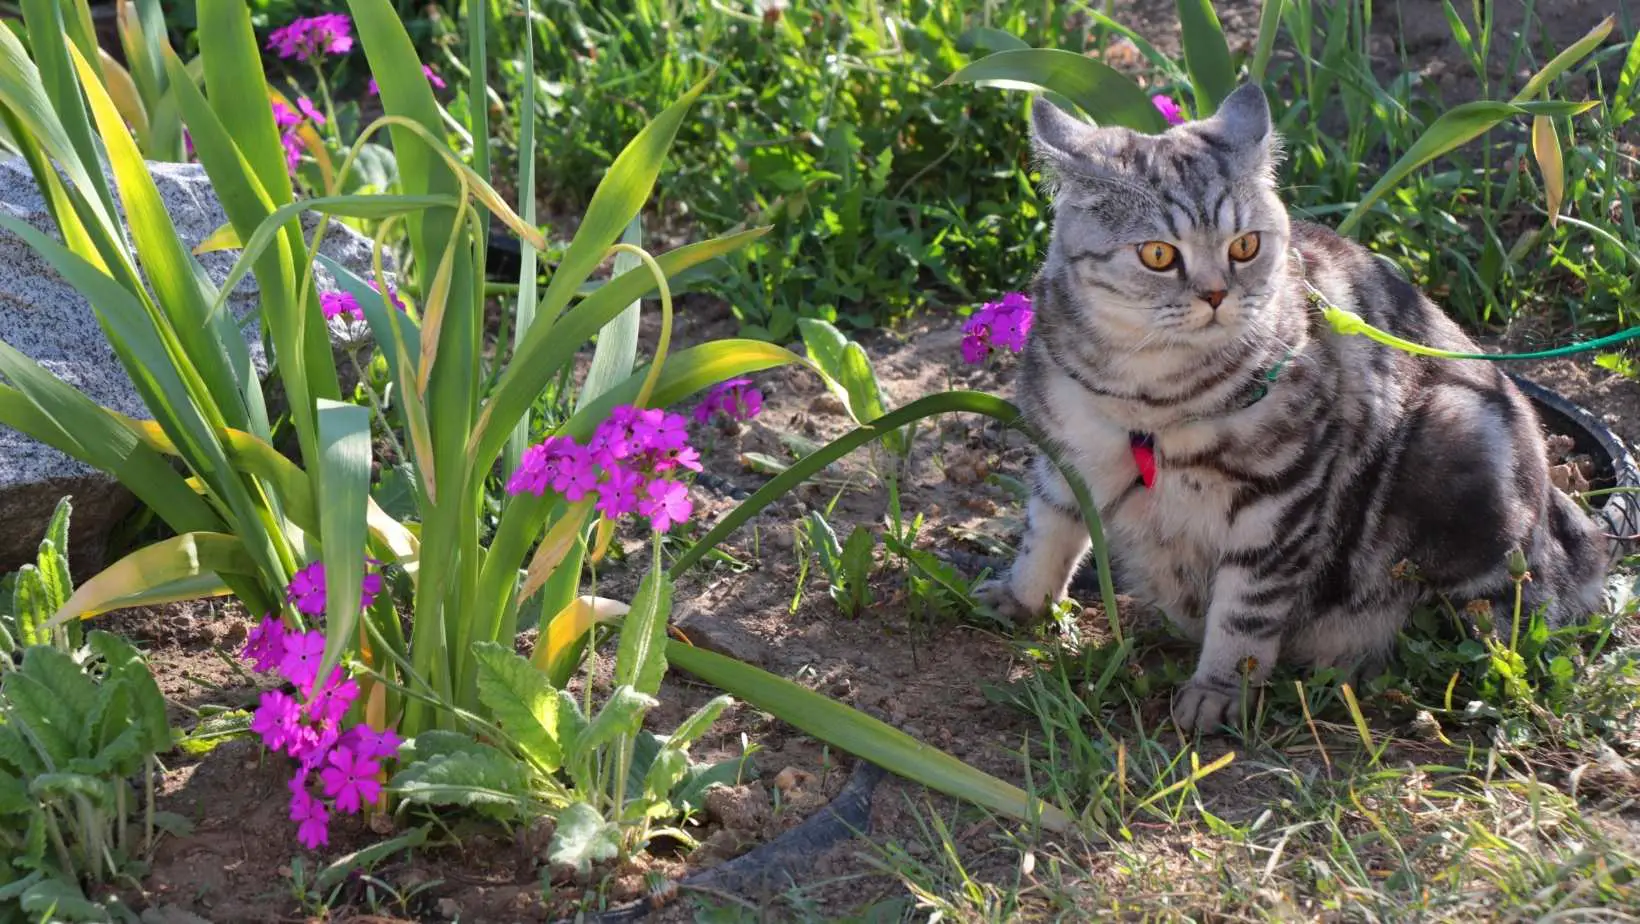 How to Keep Cats Out of a Flower Bed?